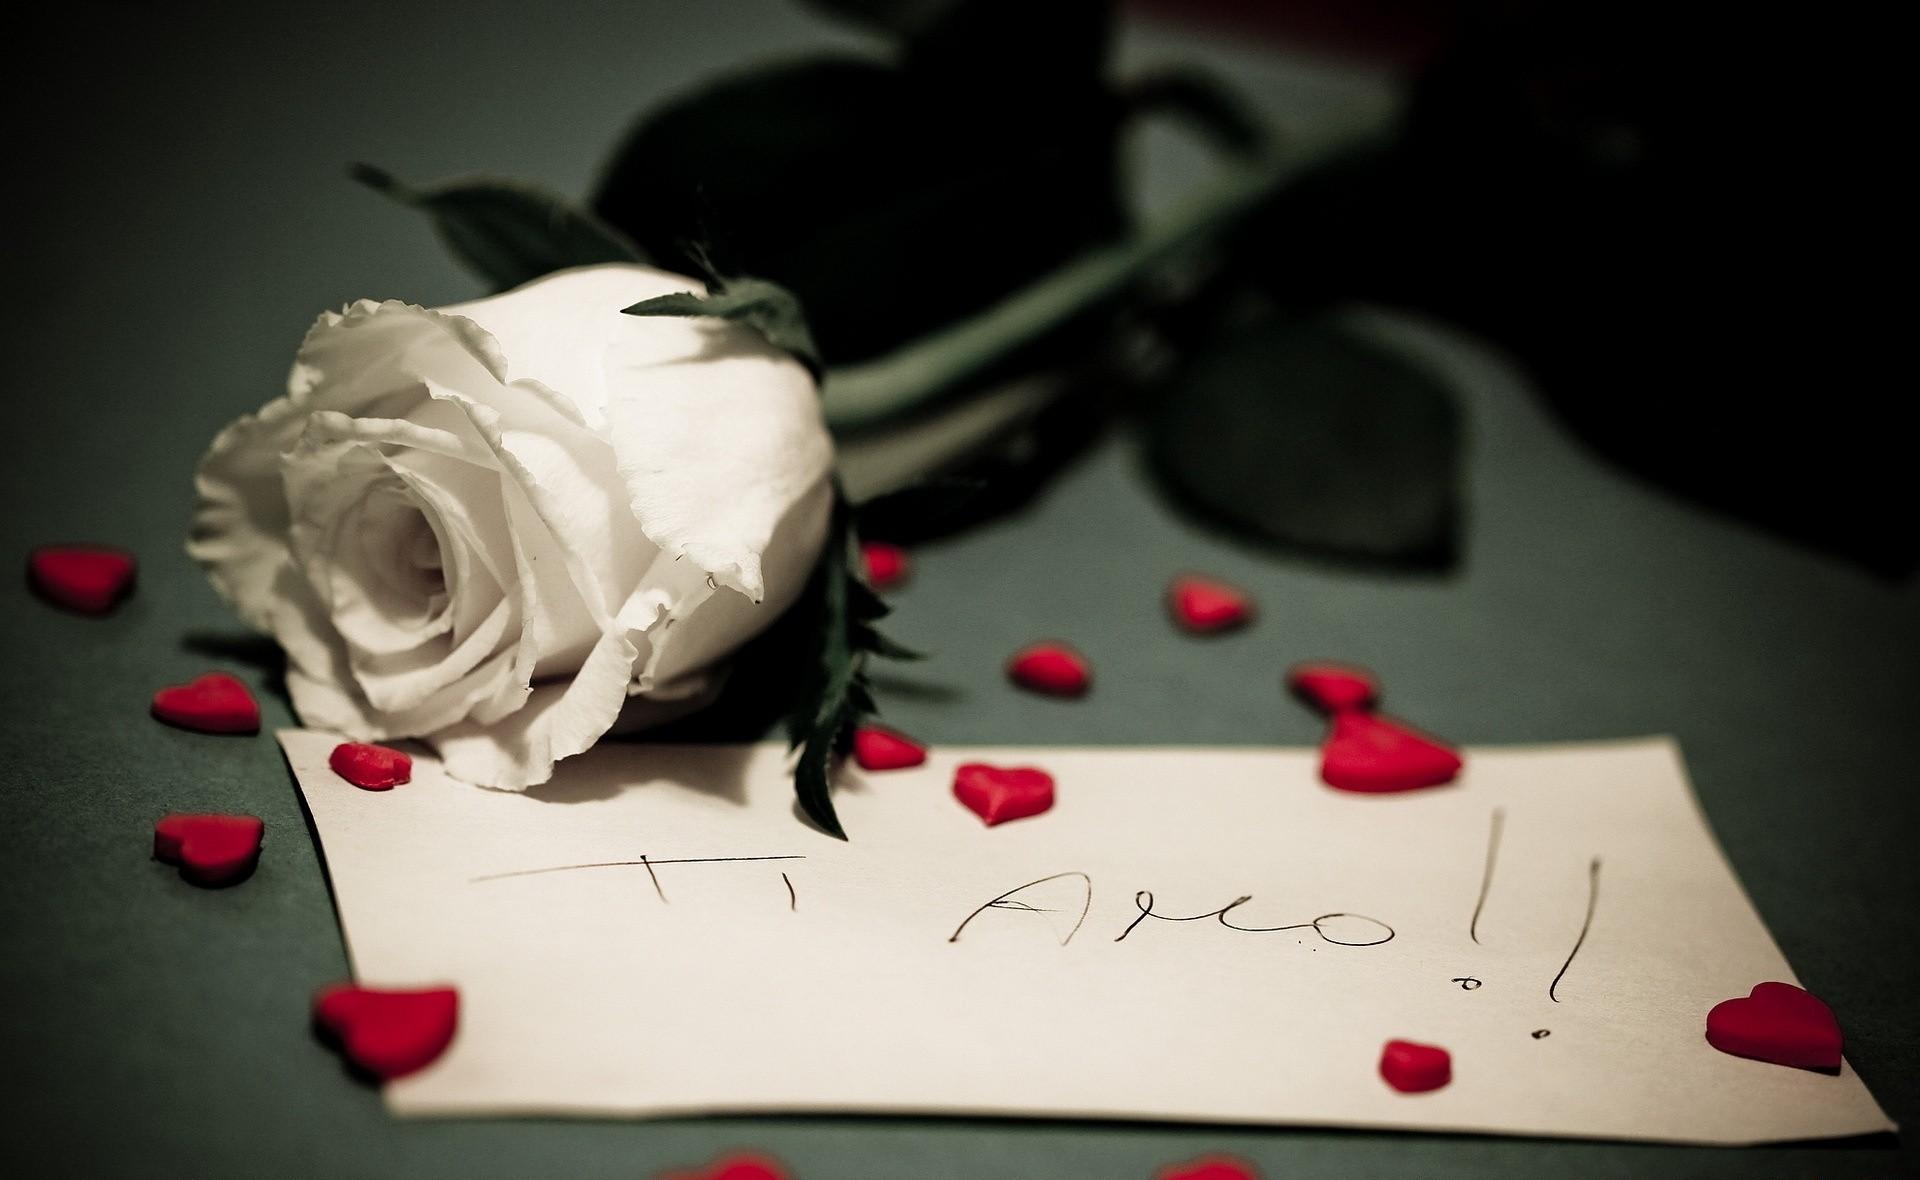 flowers, hearts, rose flower, rose, romance, note